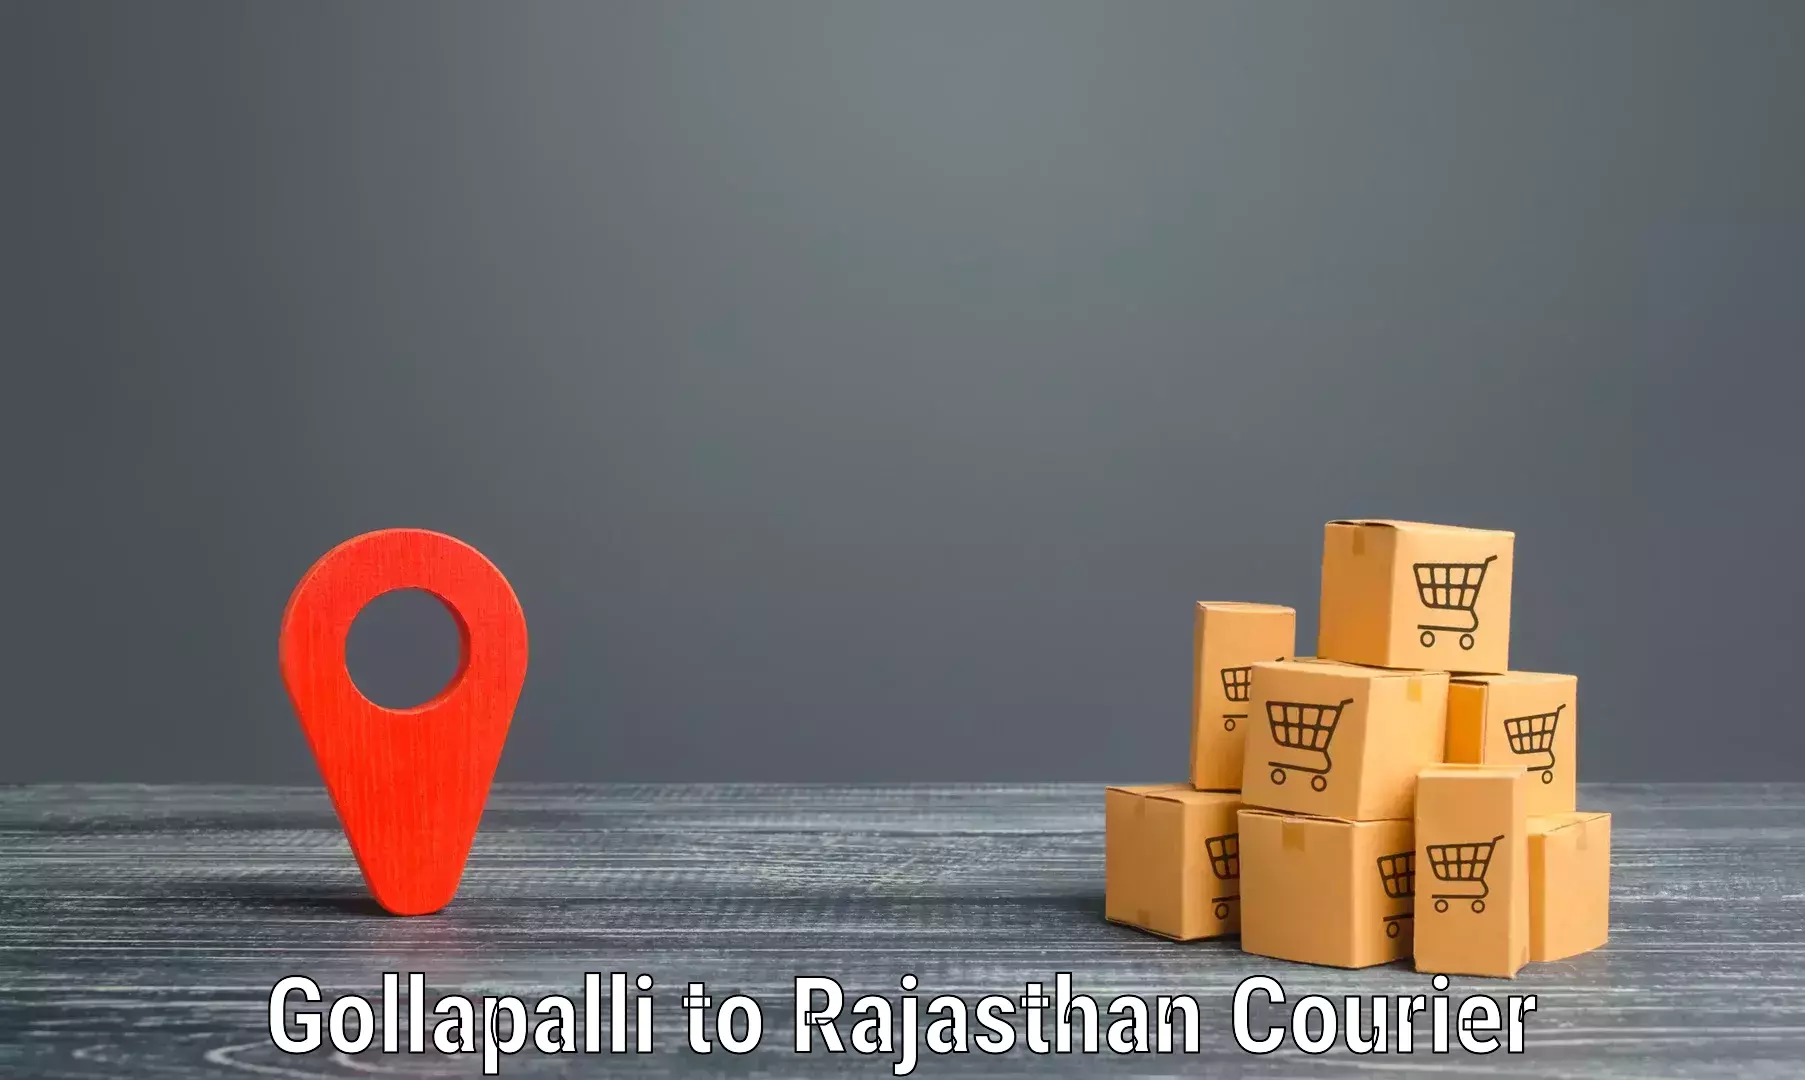 On-demand courier Gollapalli to Laxmangarh